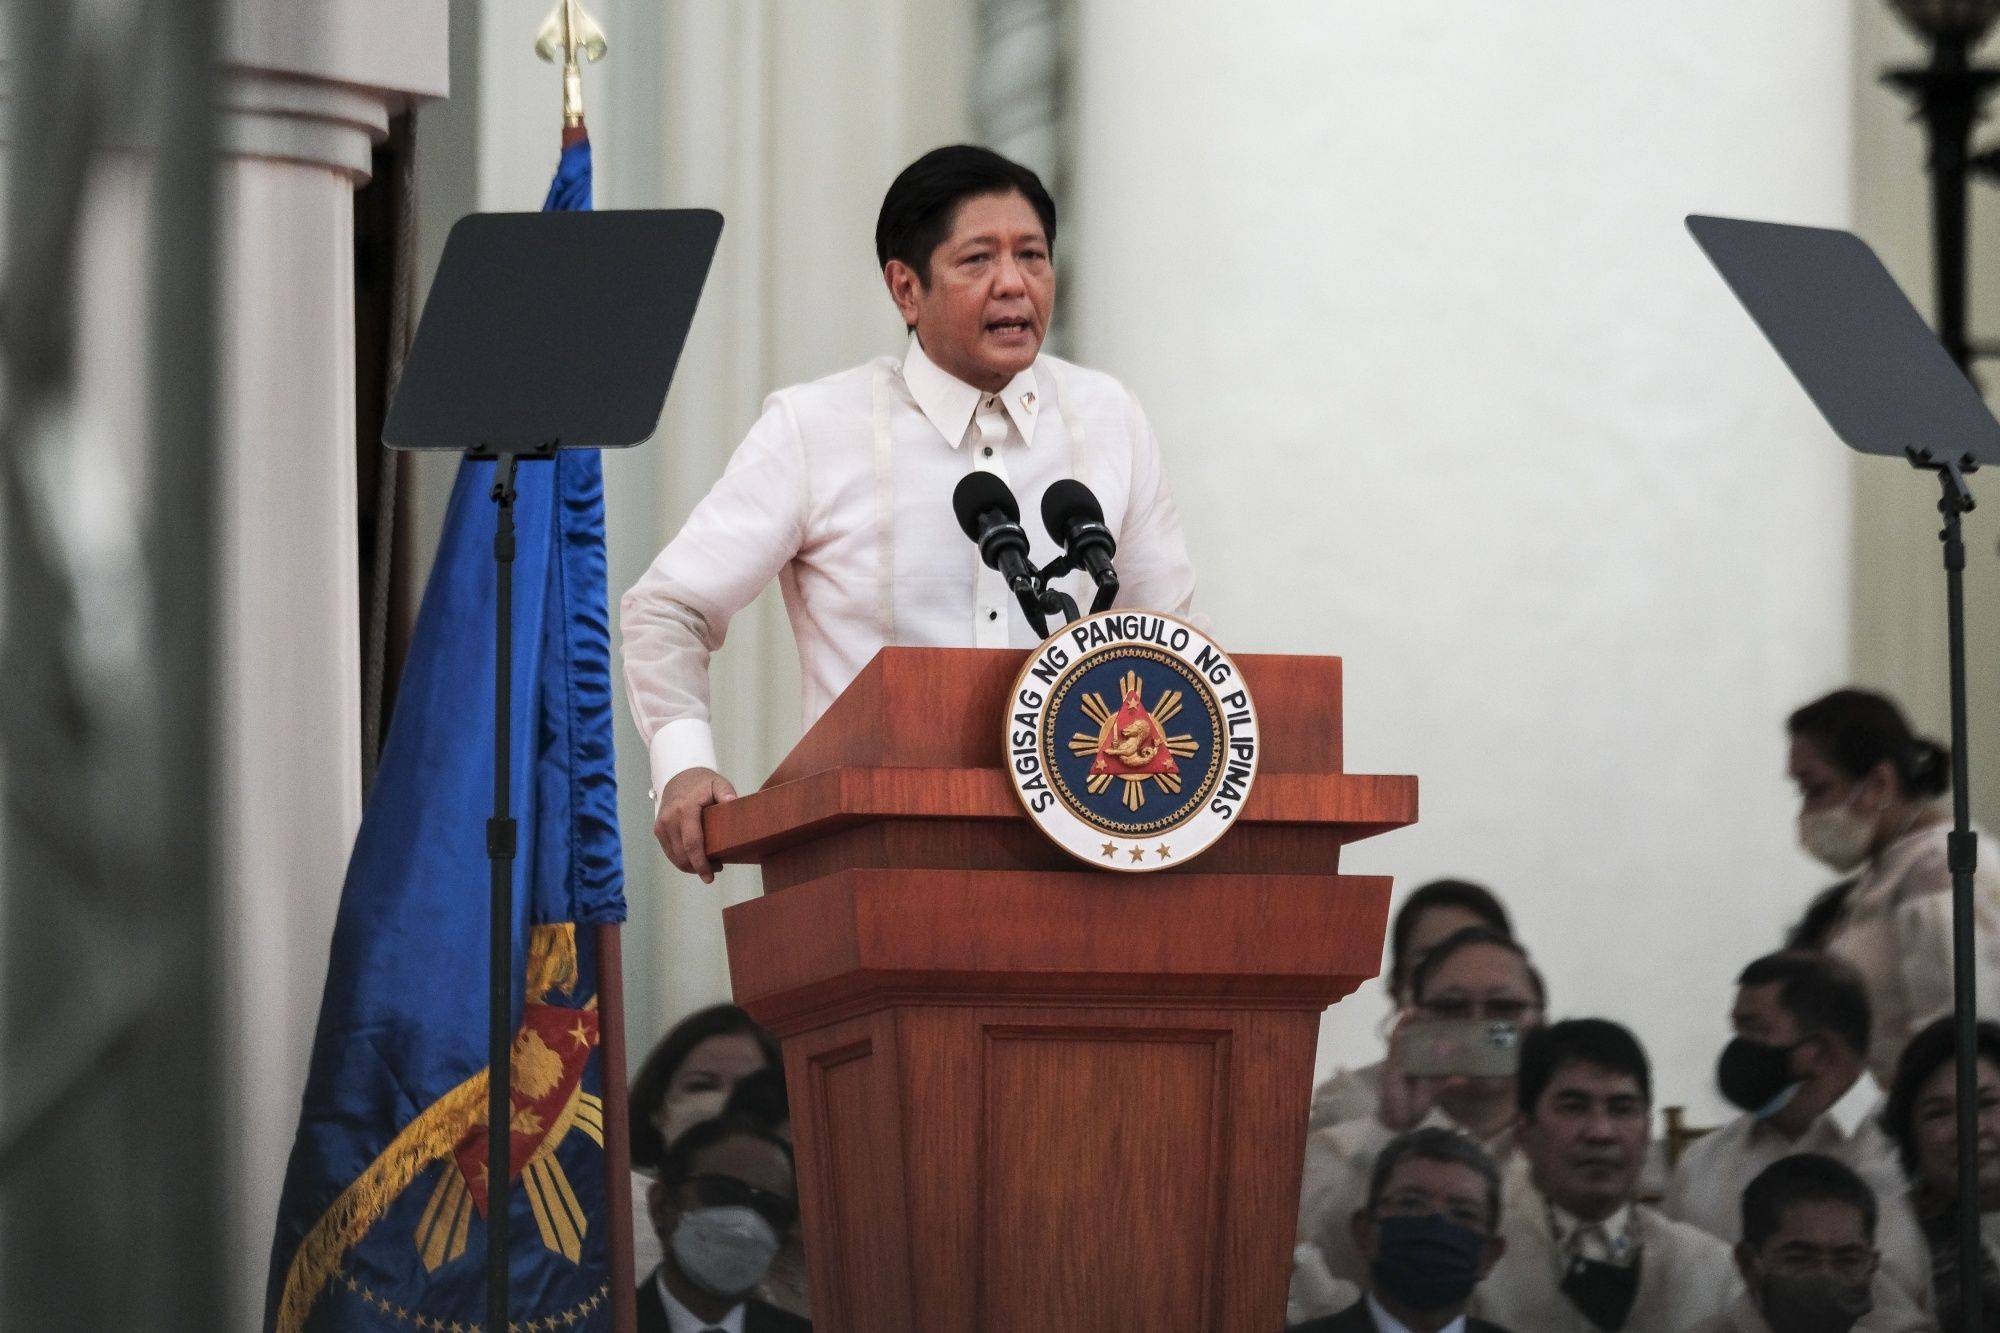 Ferdinand 'BongBong' Marcos Jr., the Philippines' president, speaks during his swearing-in ceremony at the Old Legislative Building in Manila on June 30. | BLOOMBERG